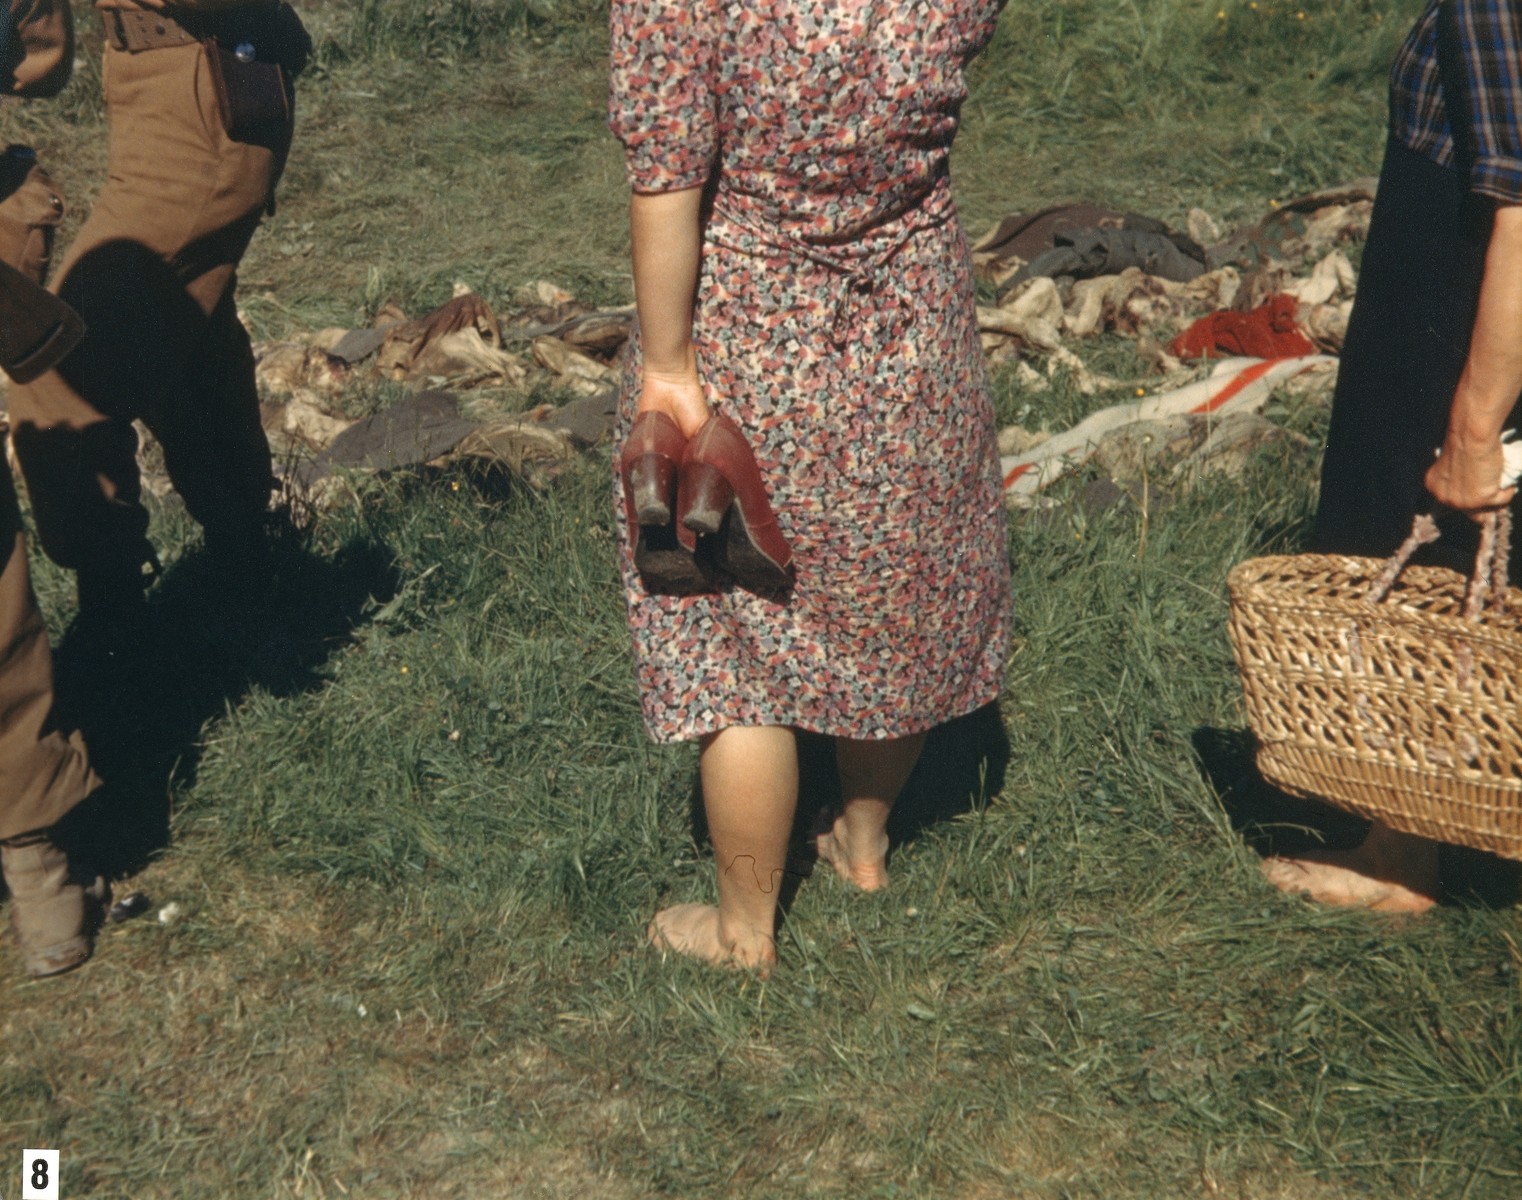 Bare-footed German women from Nammering look at the corpses of prisoners exhumed from a mass grave near the town.  

[The women might have been forced to take off their shoes by U.S. troops so they would walk through the mud near the grave.]